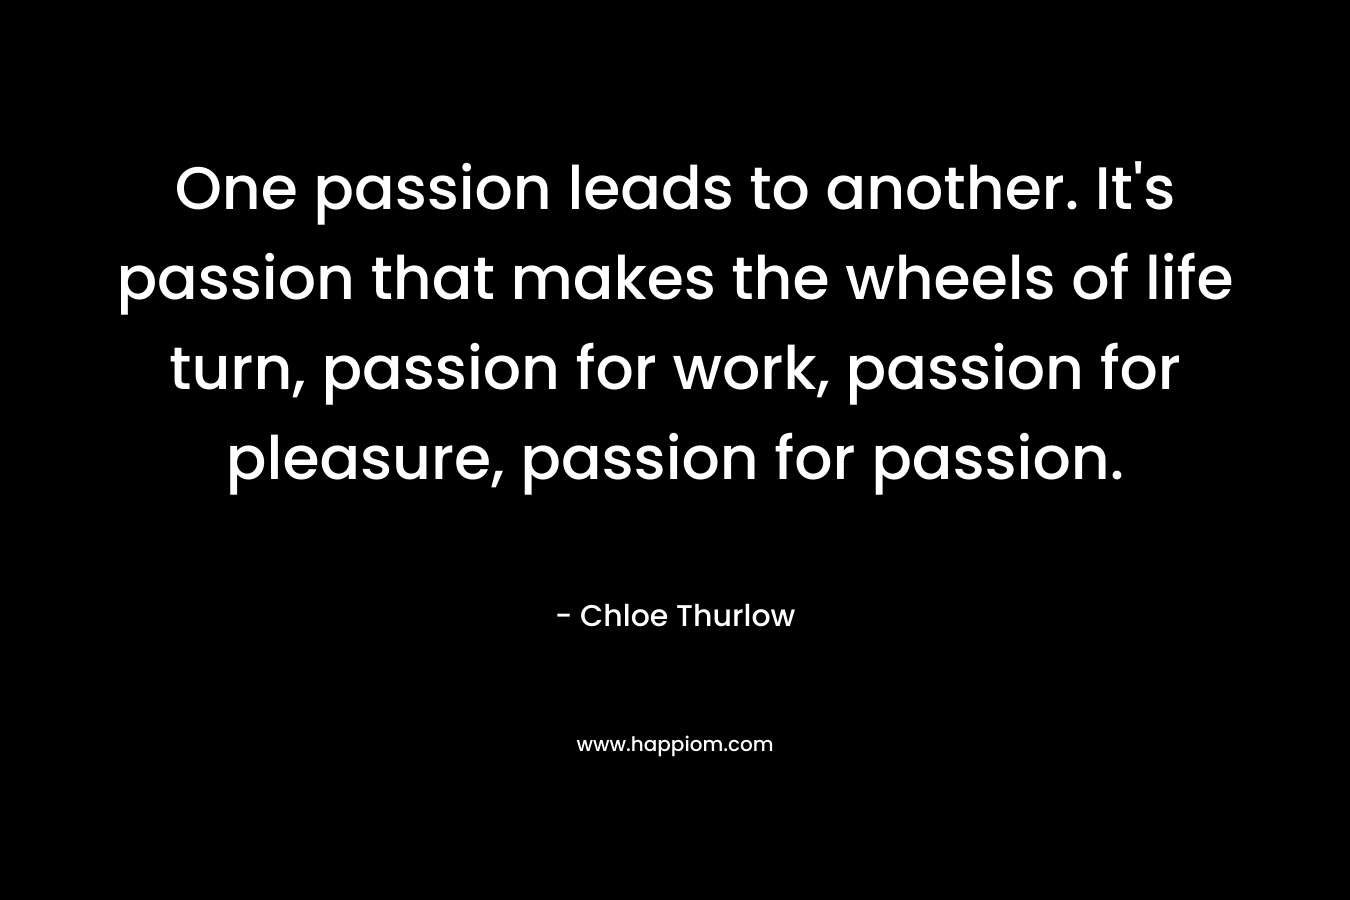 One passion leads to another. It's passion that makes the wheels of life turn, passion for work, passion for pleasure, passion for passion.